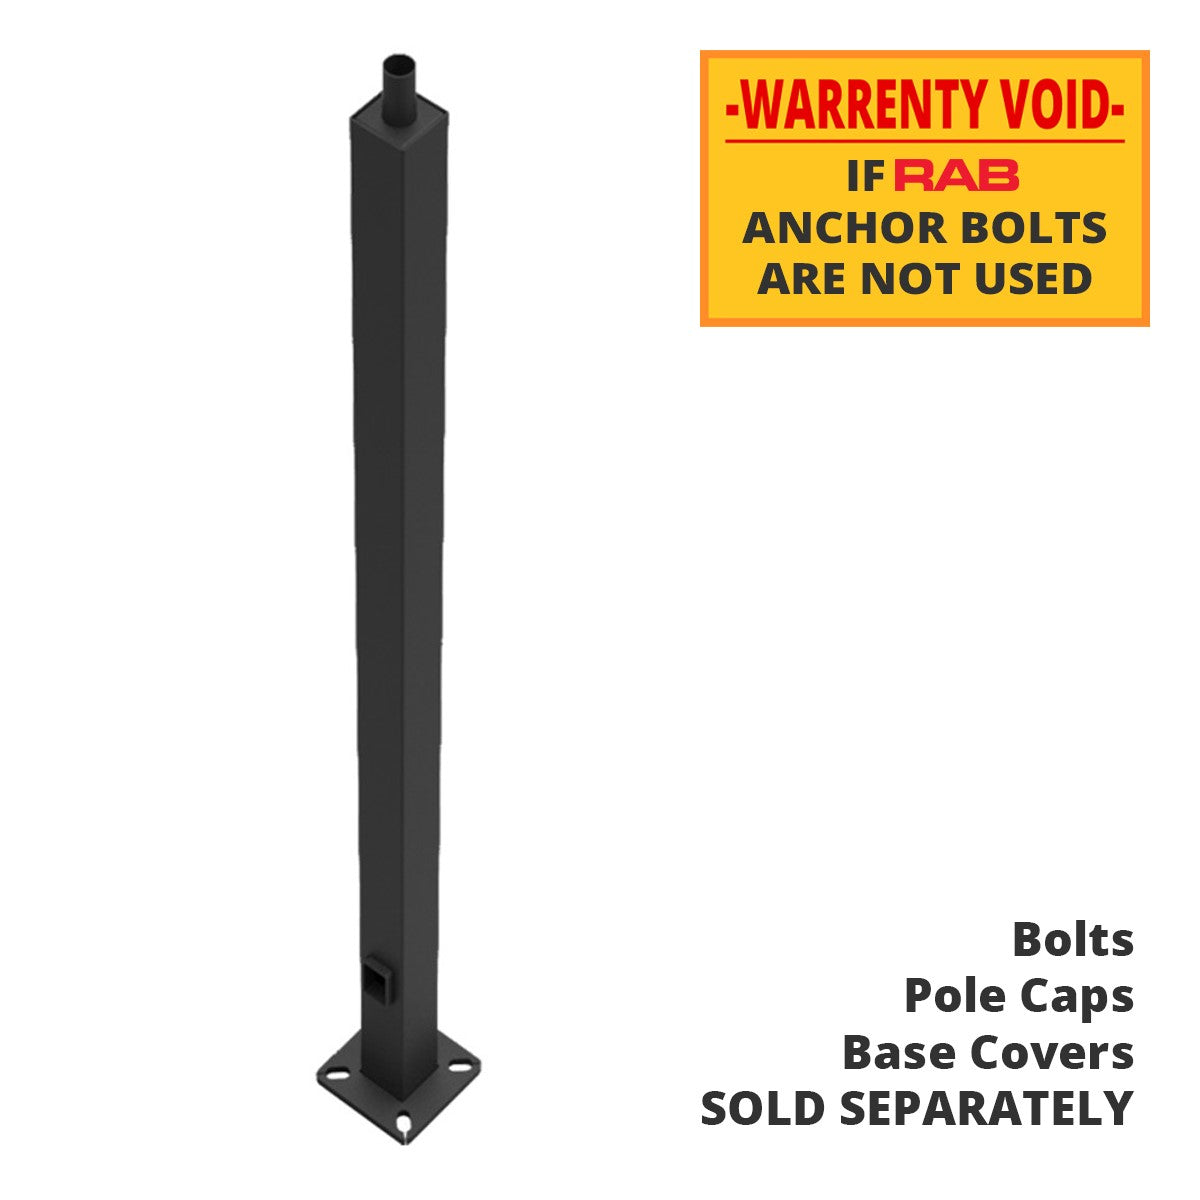 30 Ft Square Steel Tenon Top Pole 4 In. Shaft 7 Gauge